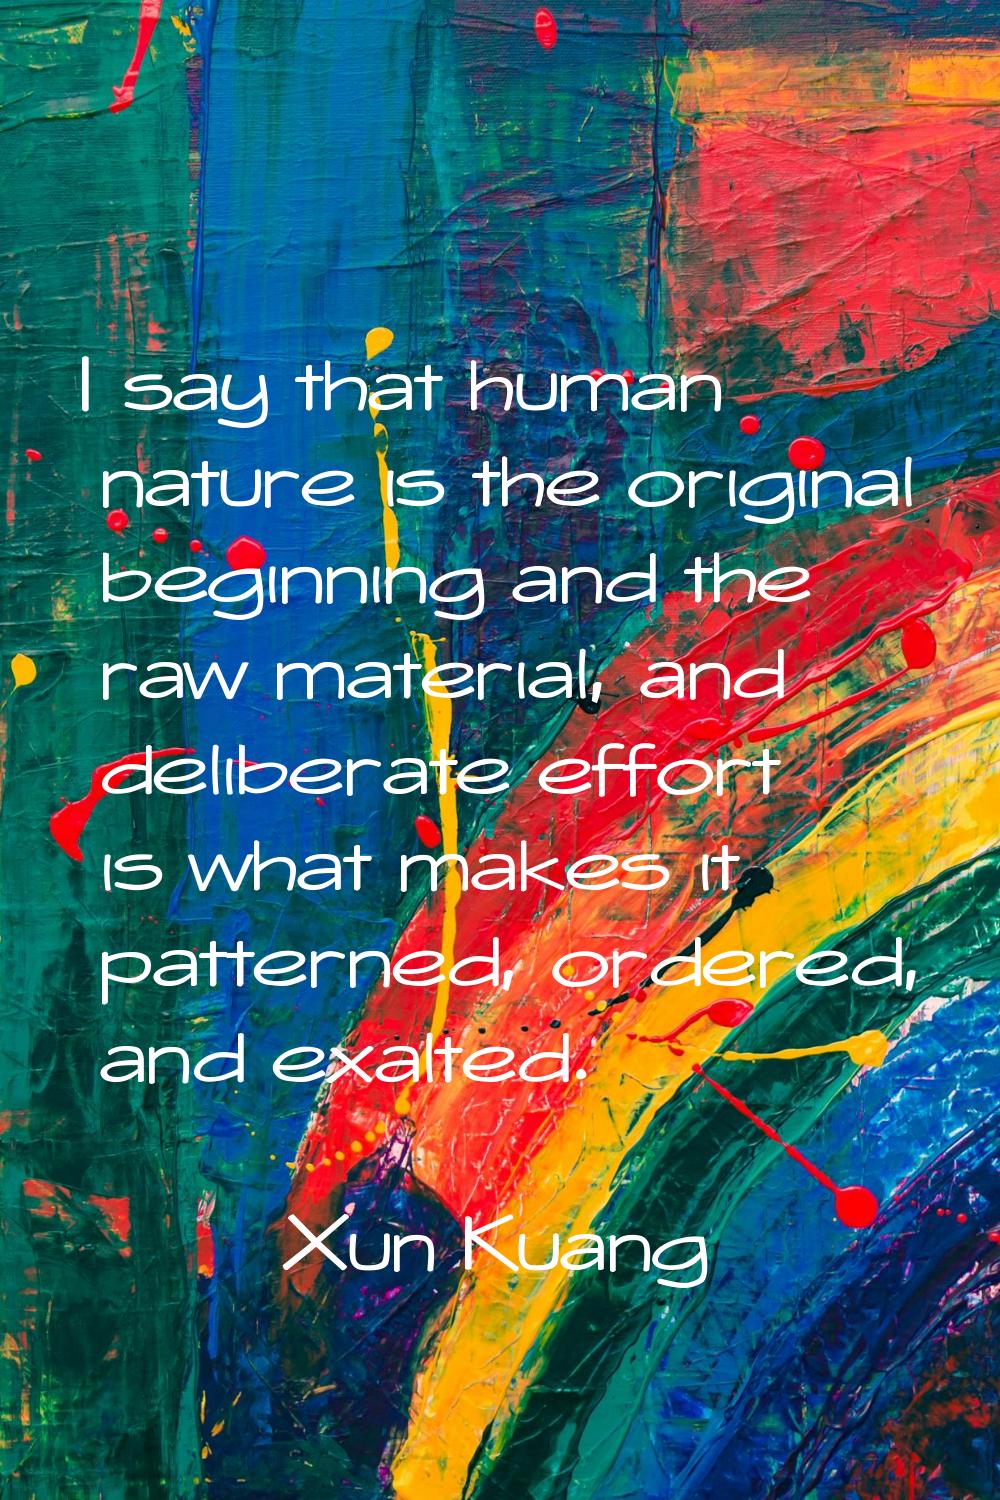 I say that human nature is the original beginning and the raw material, and deliberate effort is wh